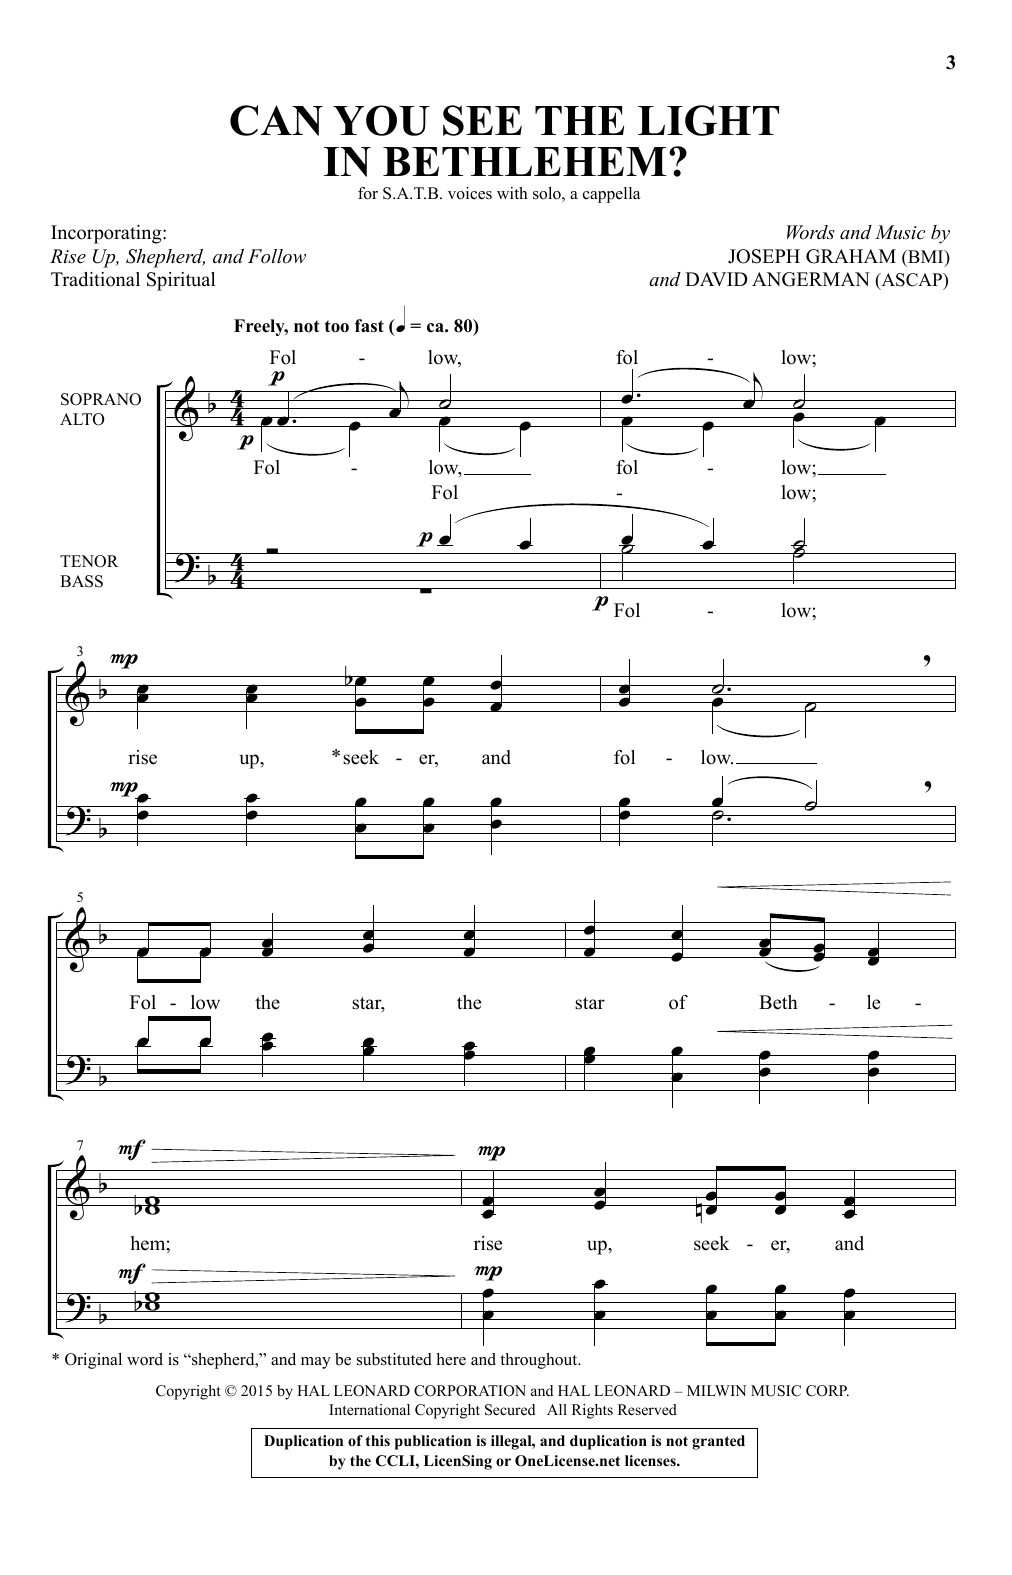 Download David Angerman Can You See The Light In Bethlehem? Sheet Music